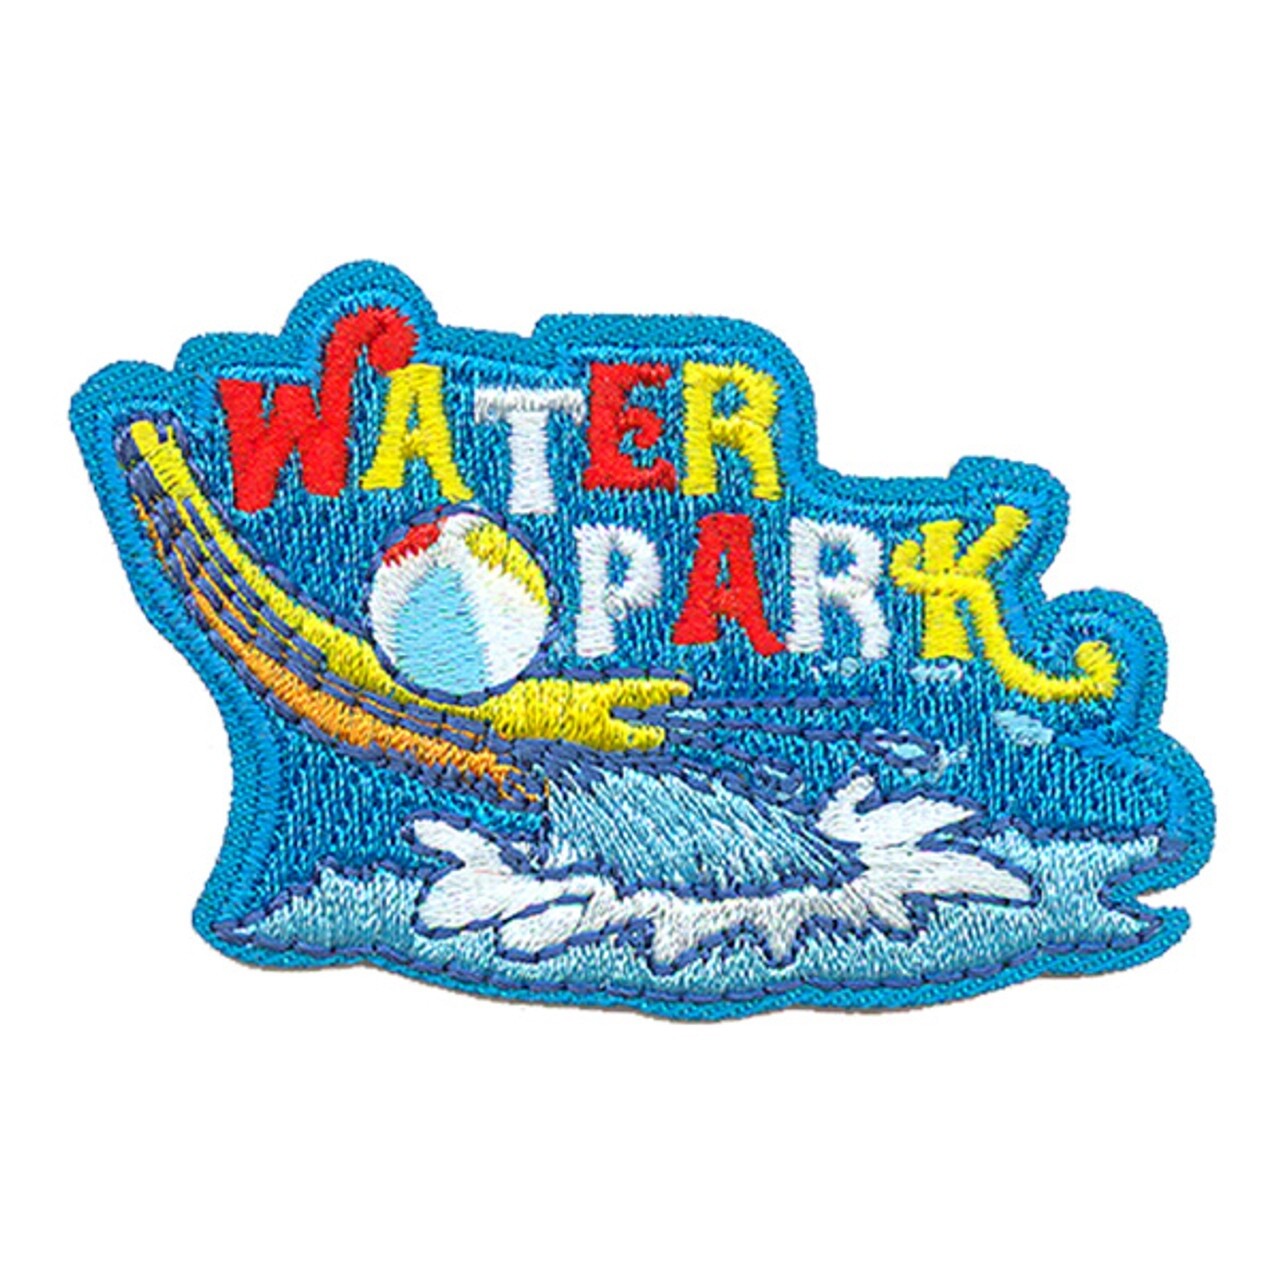 Water Park Patch (Slide)